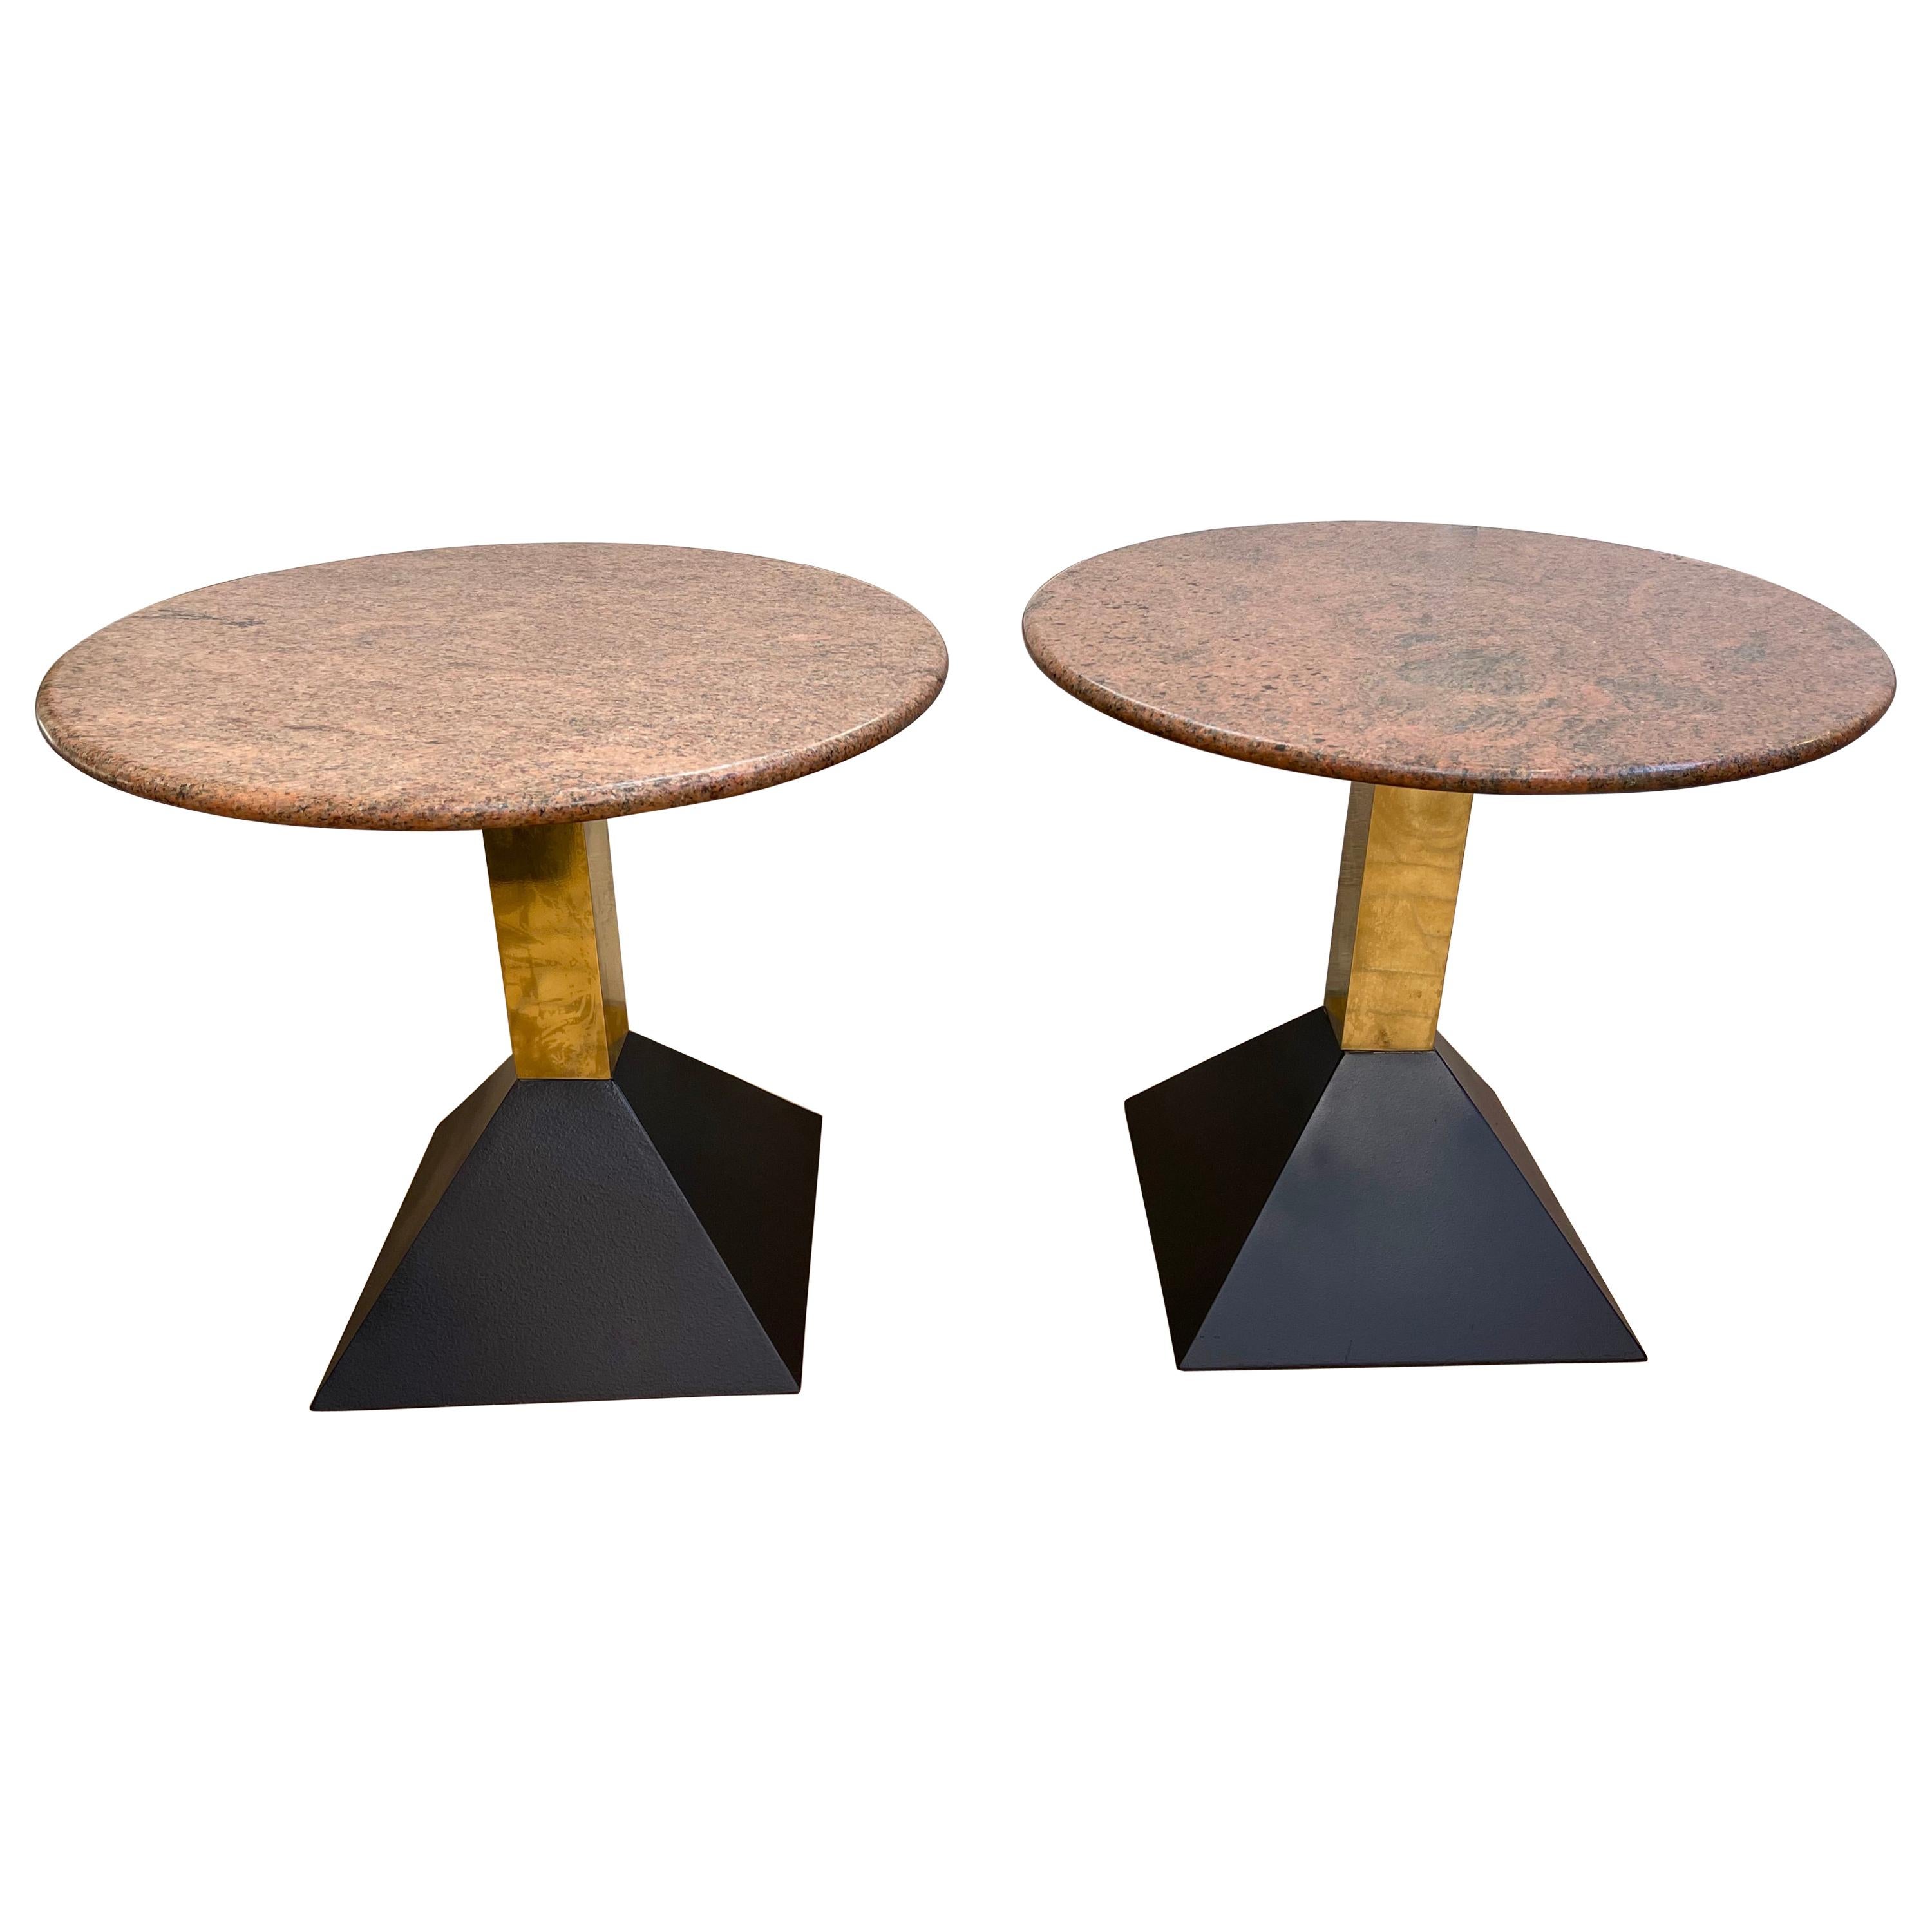 Pair of Red Granite and Brass Side Tables, Italy, 1980s